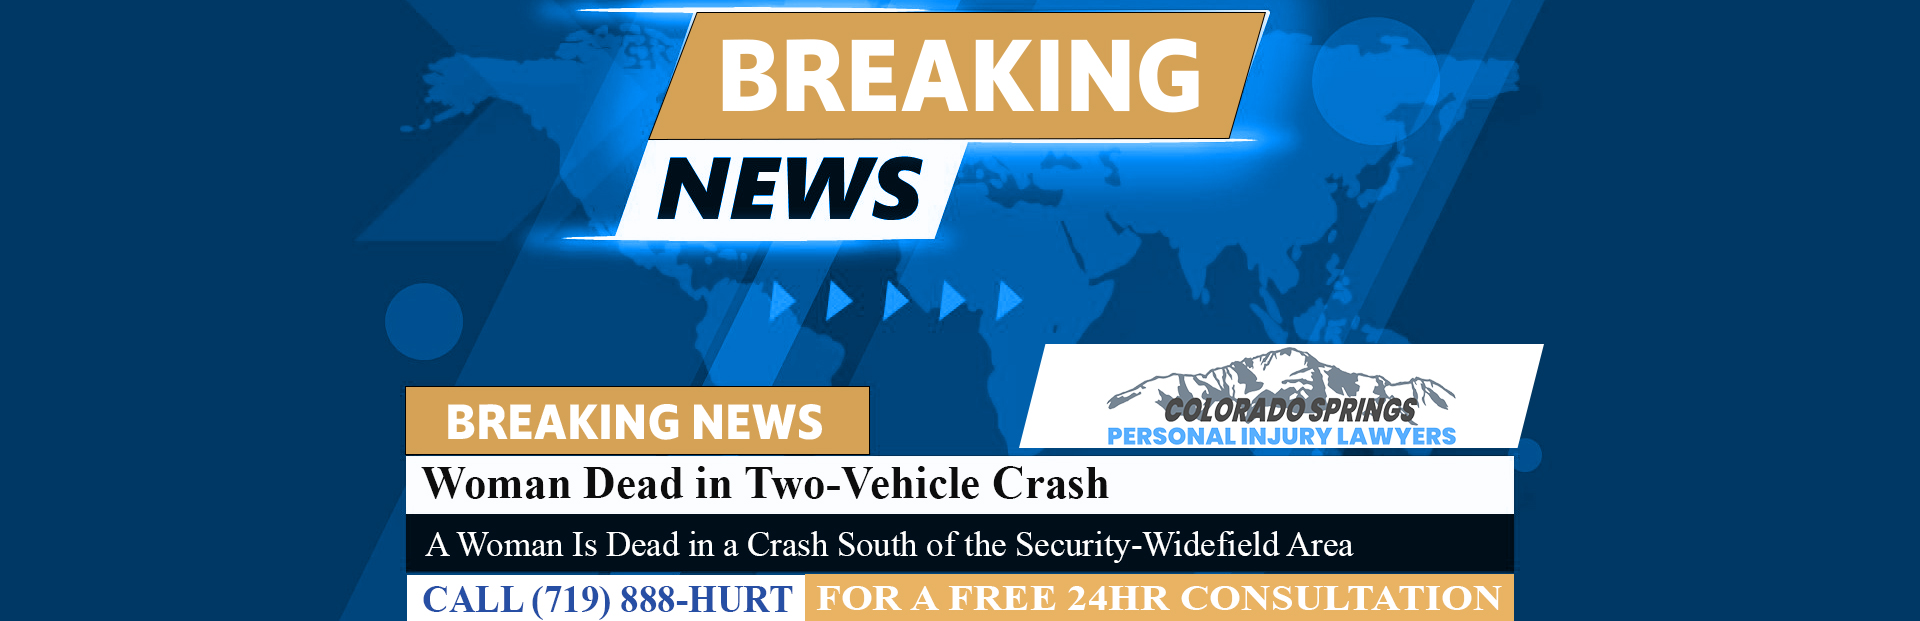 [11-08-23] Woman Dead in Two-Vehicle Crash Near Security-Widefield